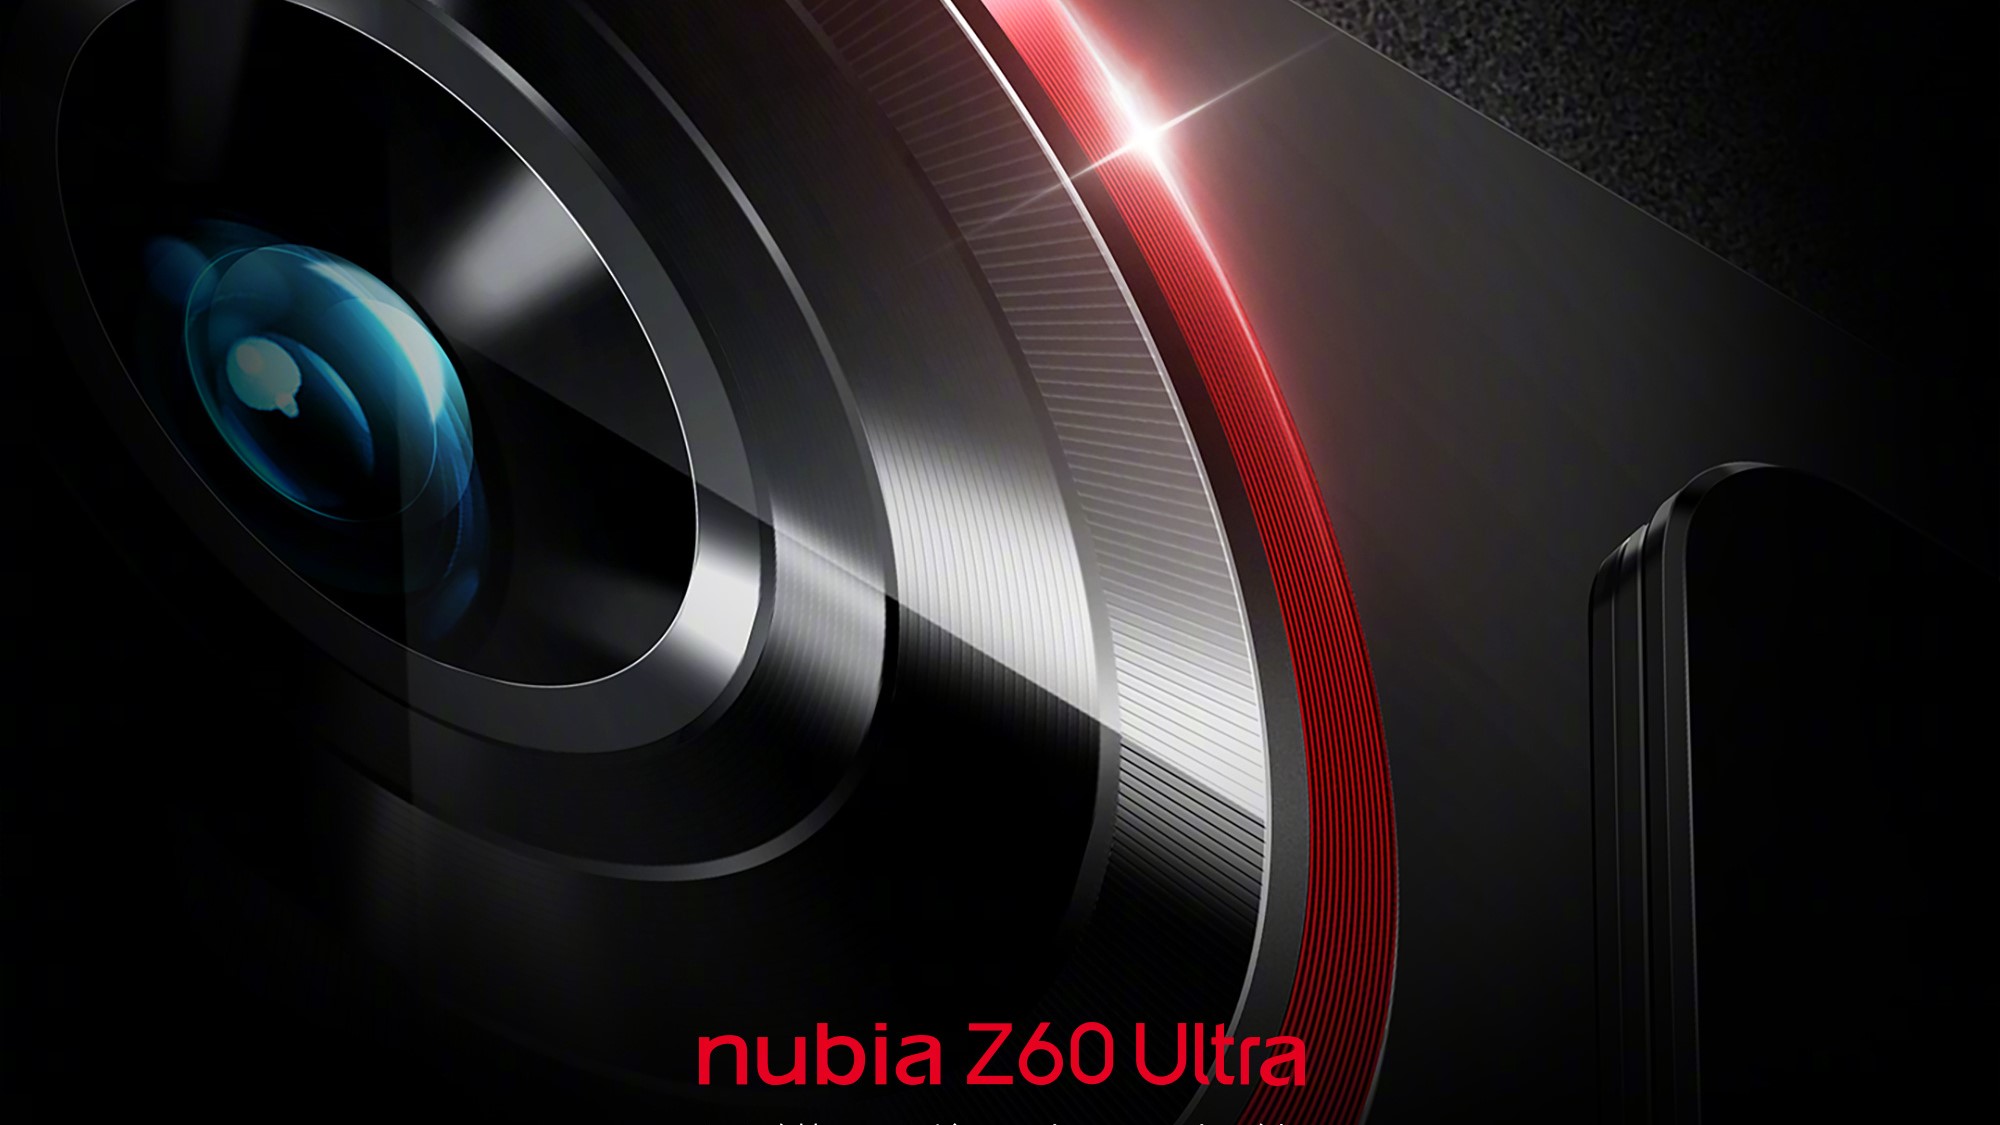 The nubia Z50 Ultra smartphone received 35- and 85-mm lenses, as